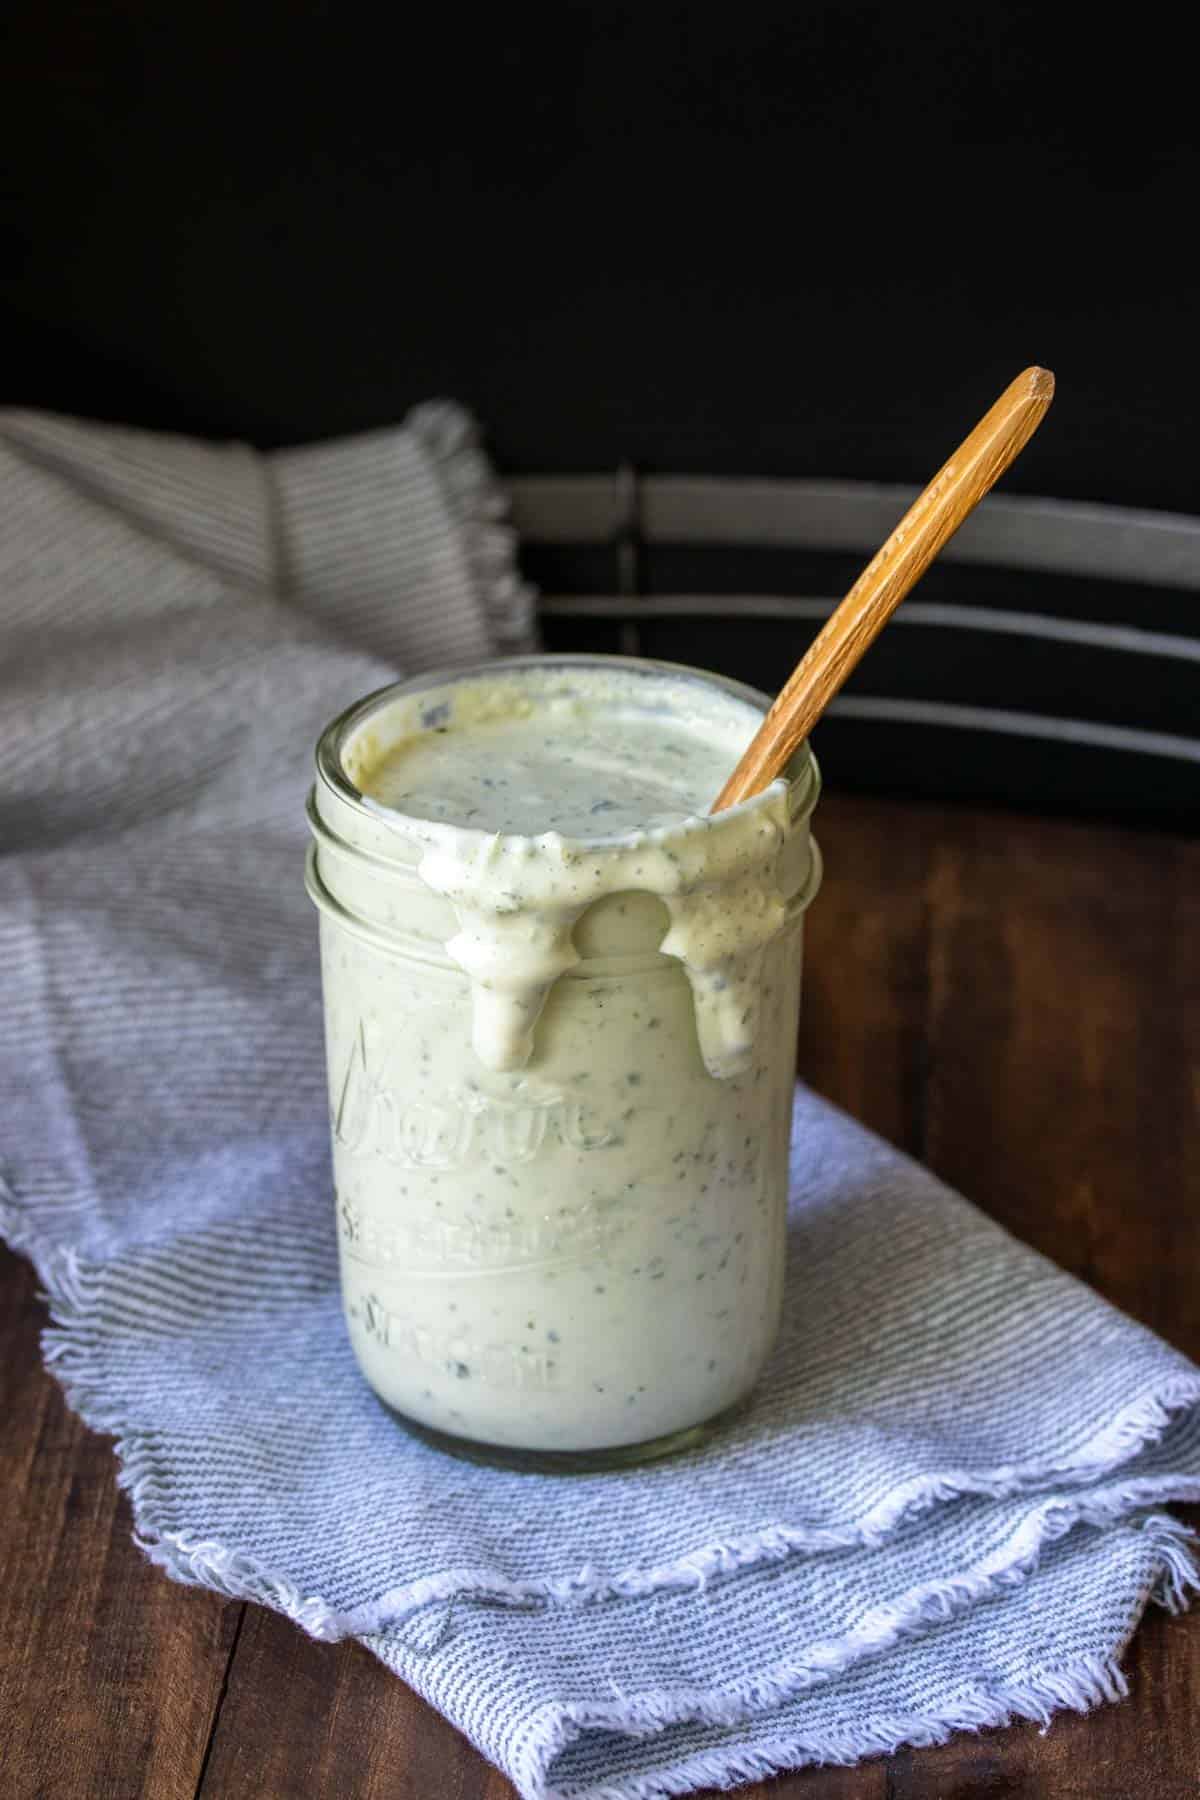 A glass jar with a creamy herb sauce sitting on a napkin on a wooden surface